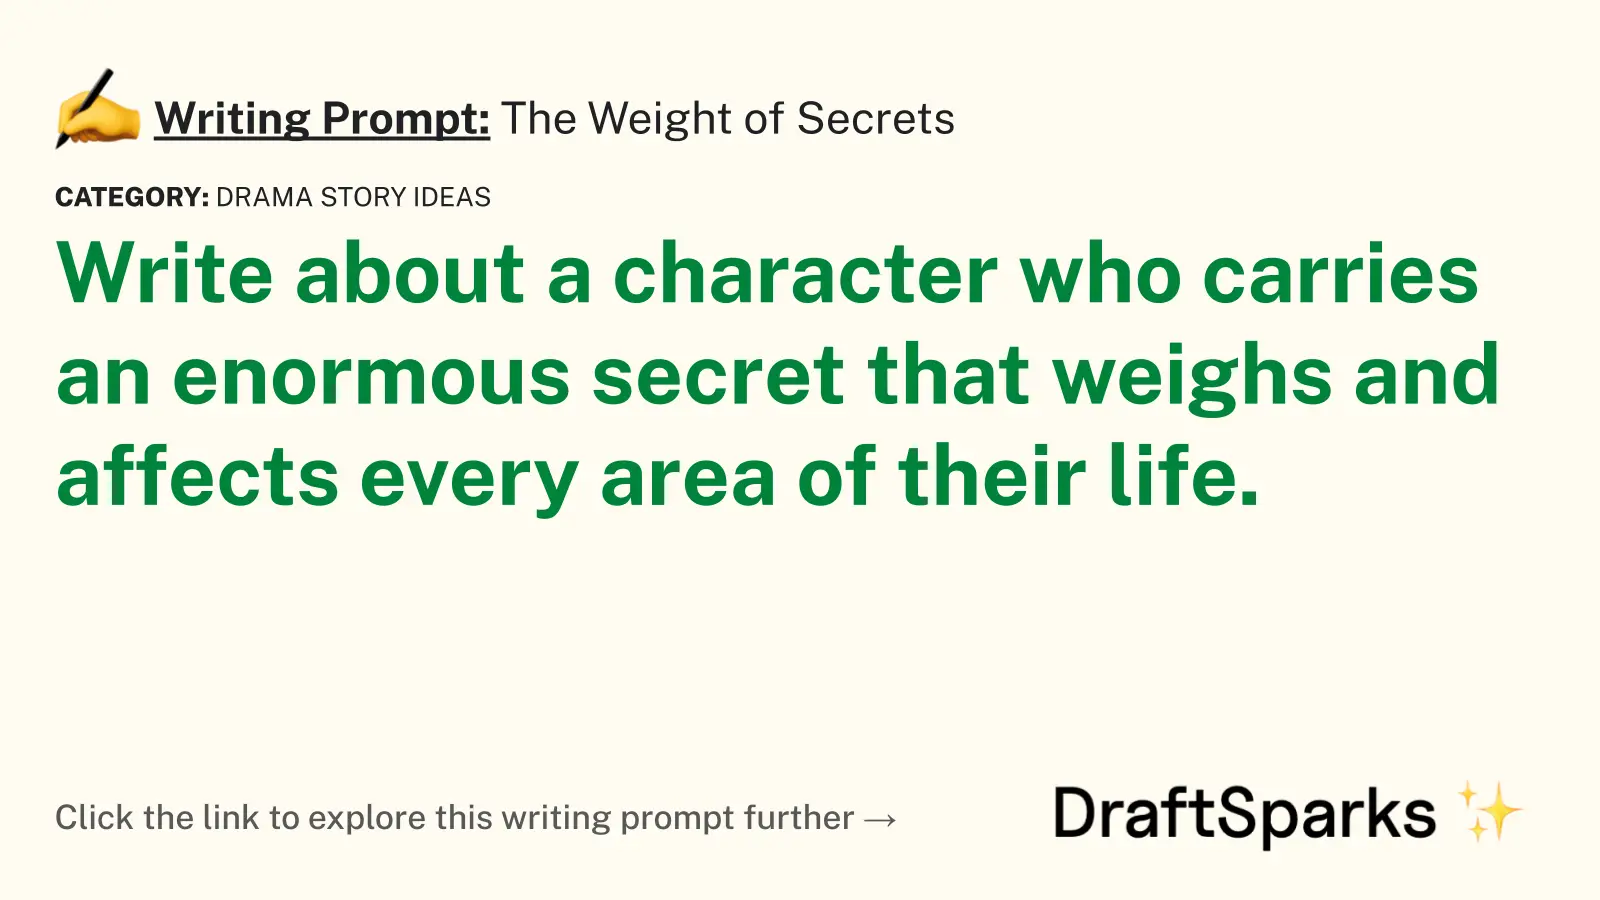 The Weight of Secrets